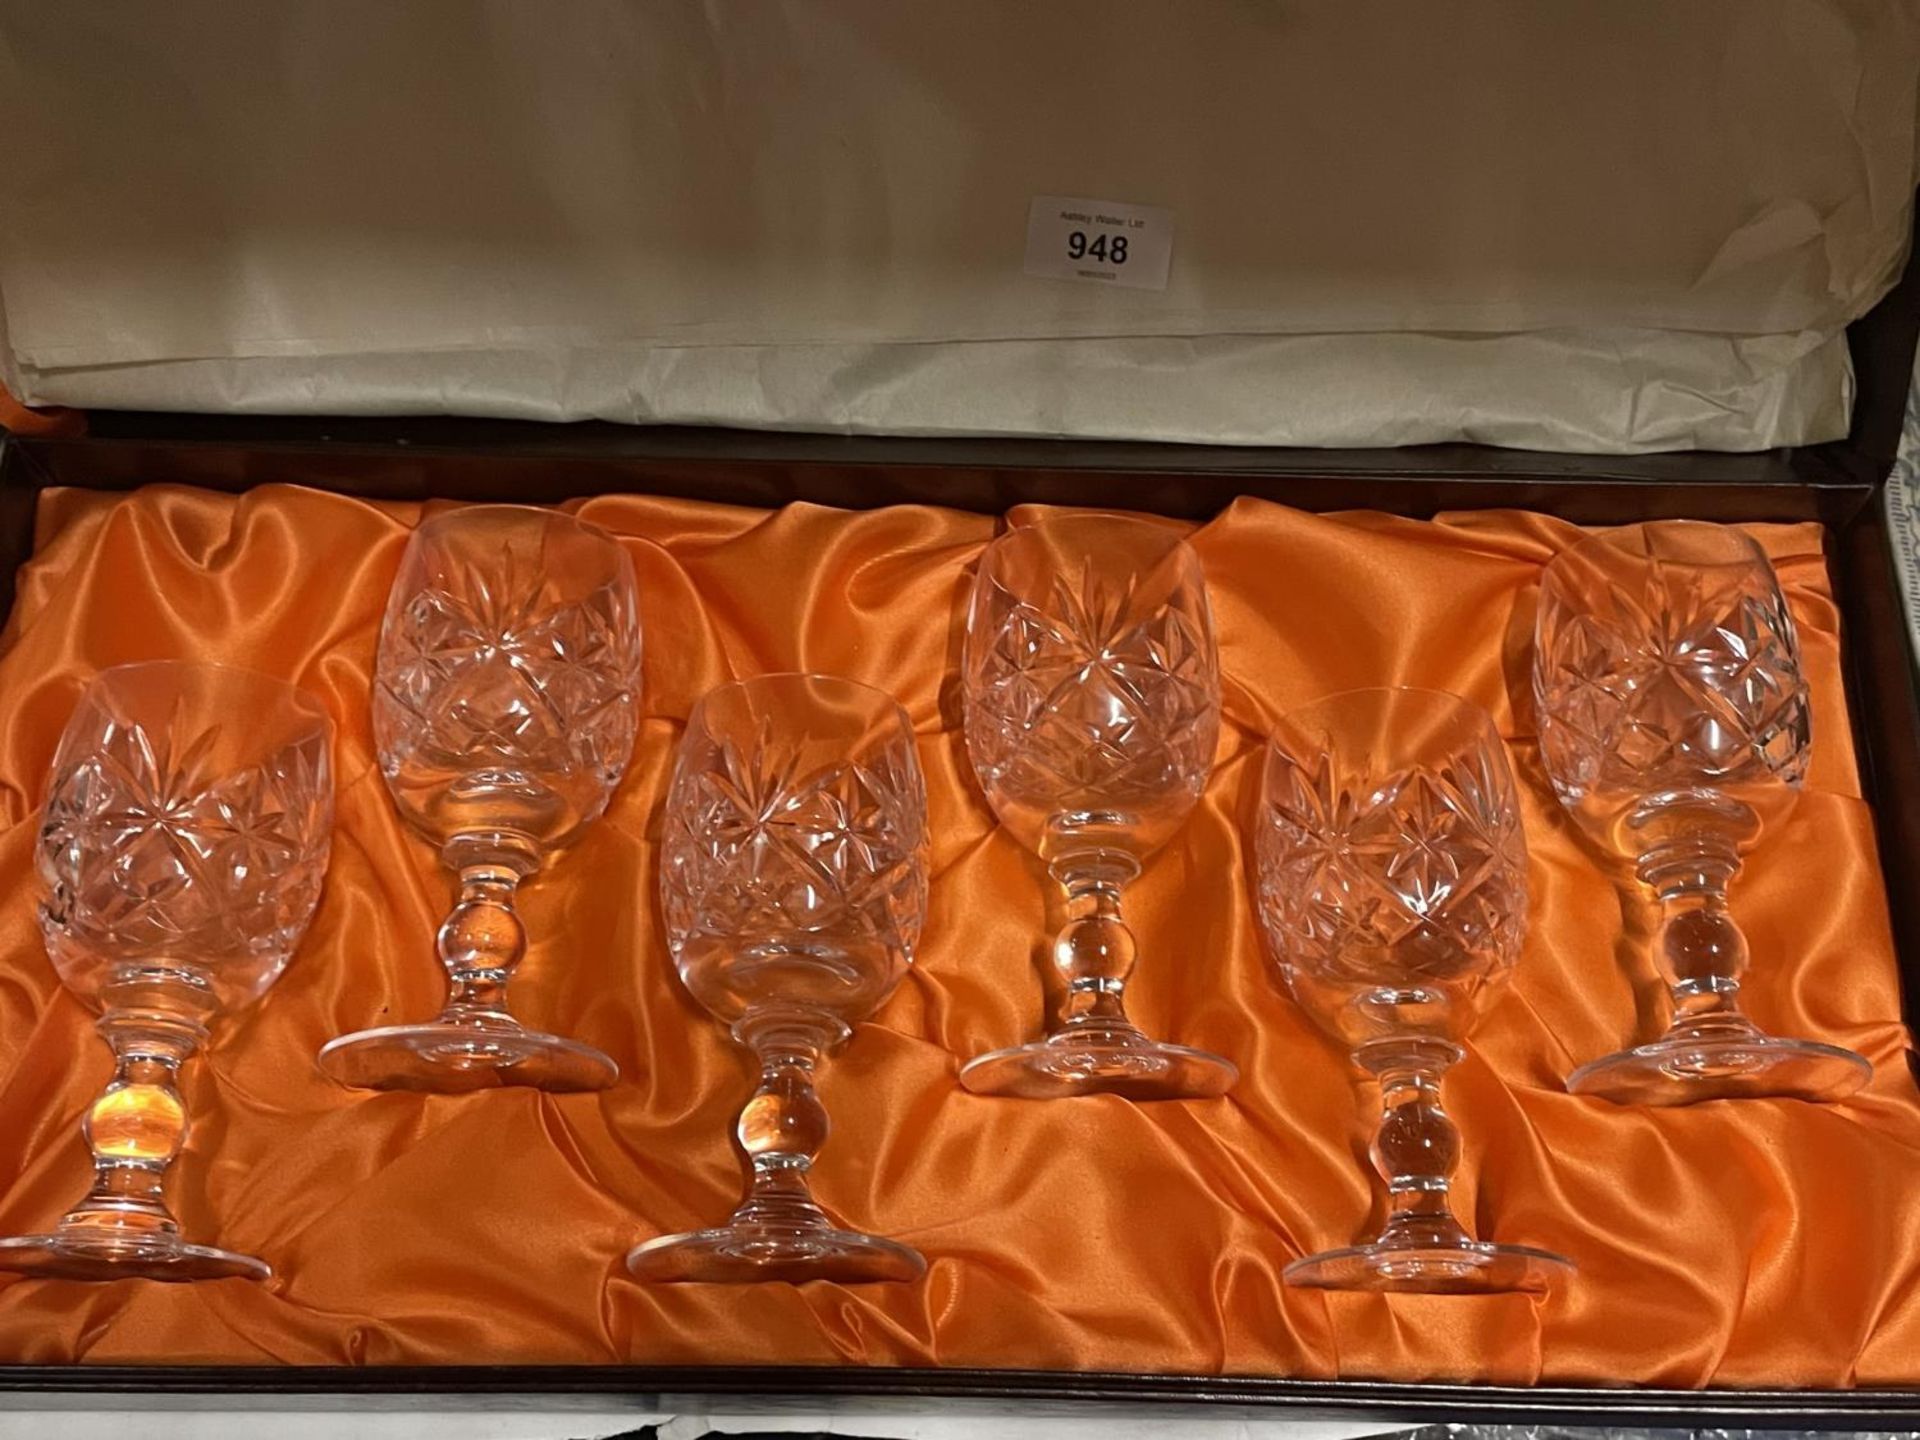 TWO BOXED SETS OF WEBB CONTINENTAL LEAD CRYSTAL WINE GLASSES - 12 GLASSES IN TOTAL - Image 2 of 3